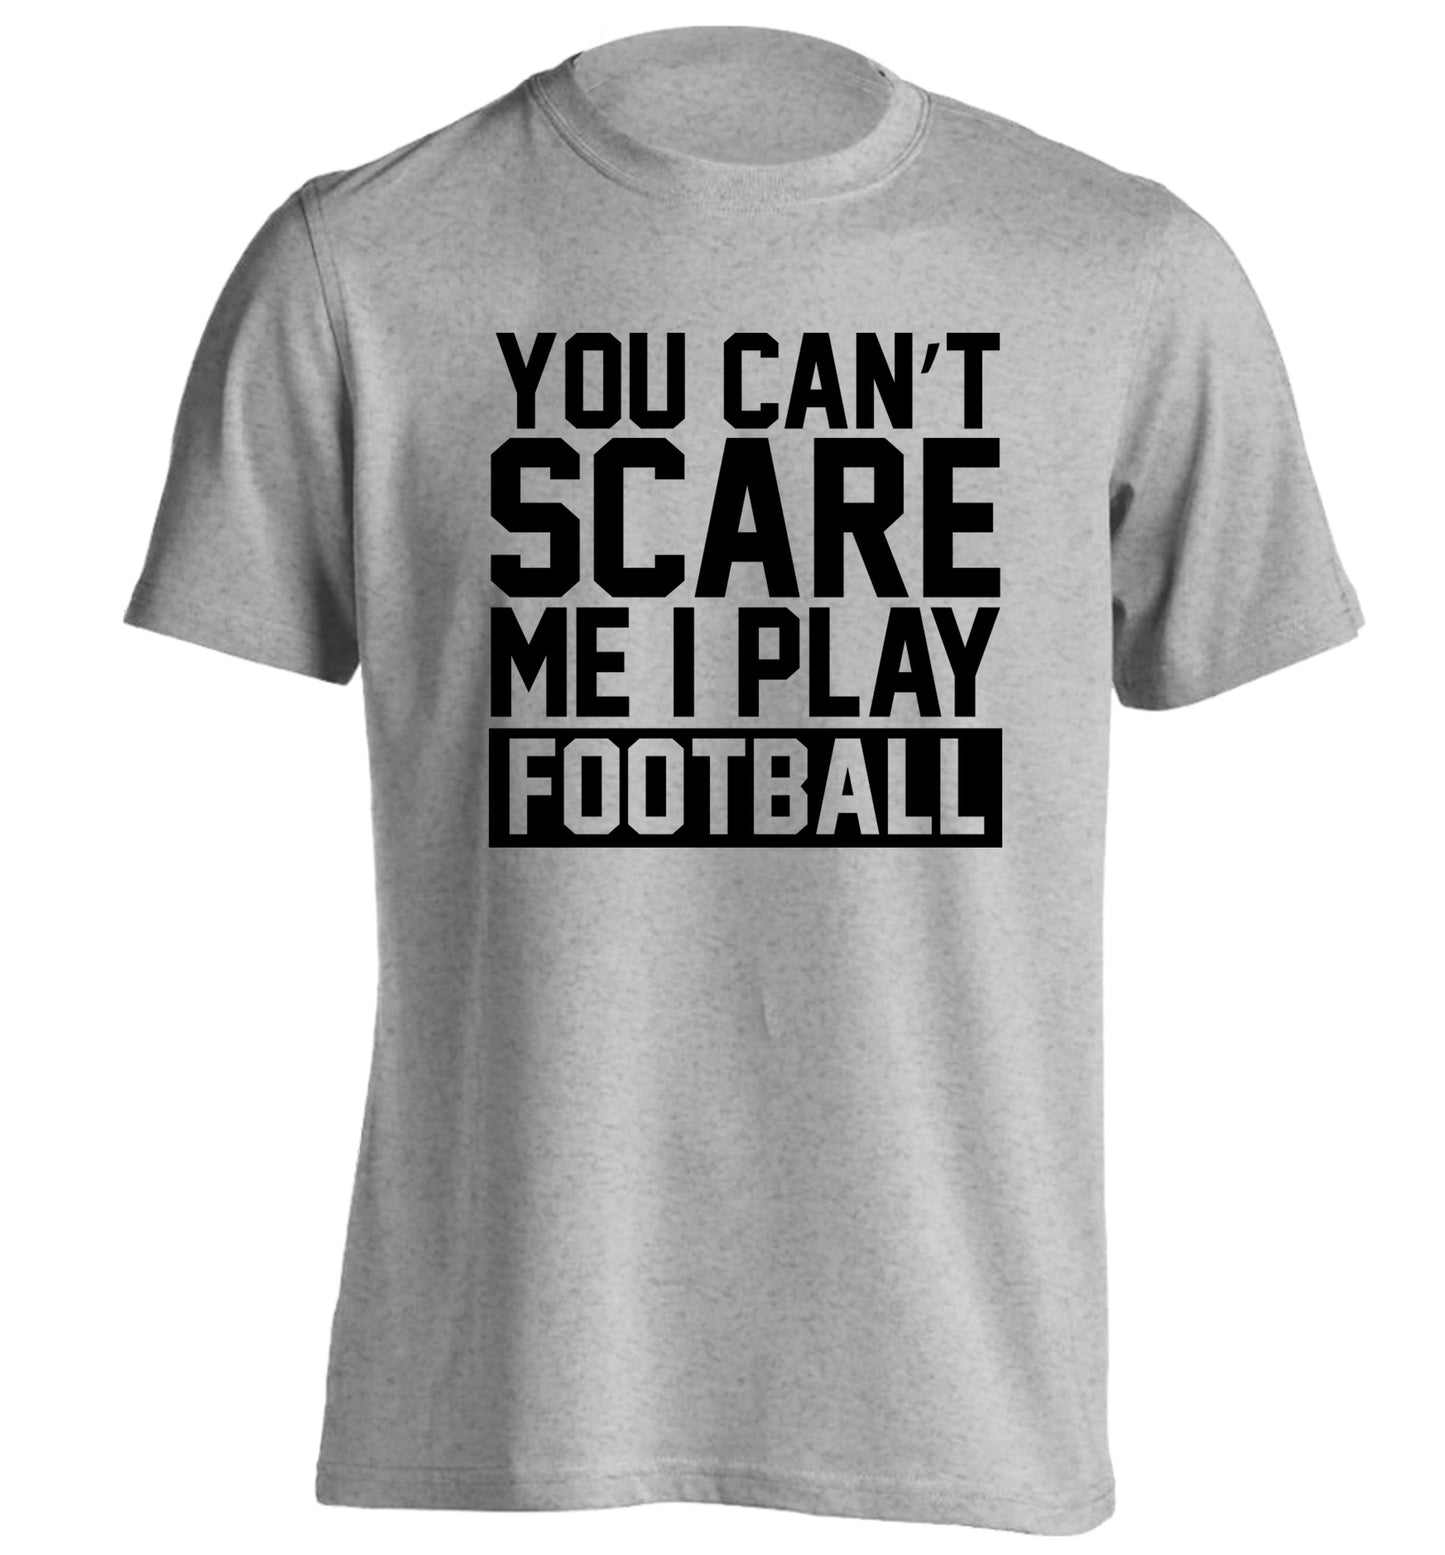 You can't scare me I play football adults unisex grey Tshirt 2XL